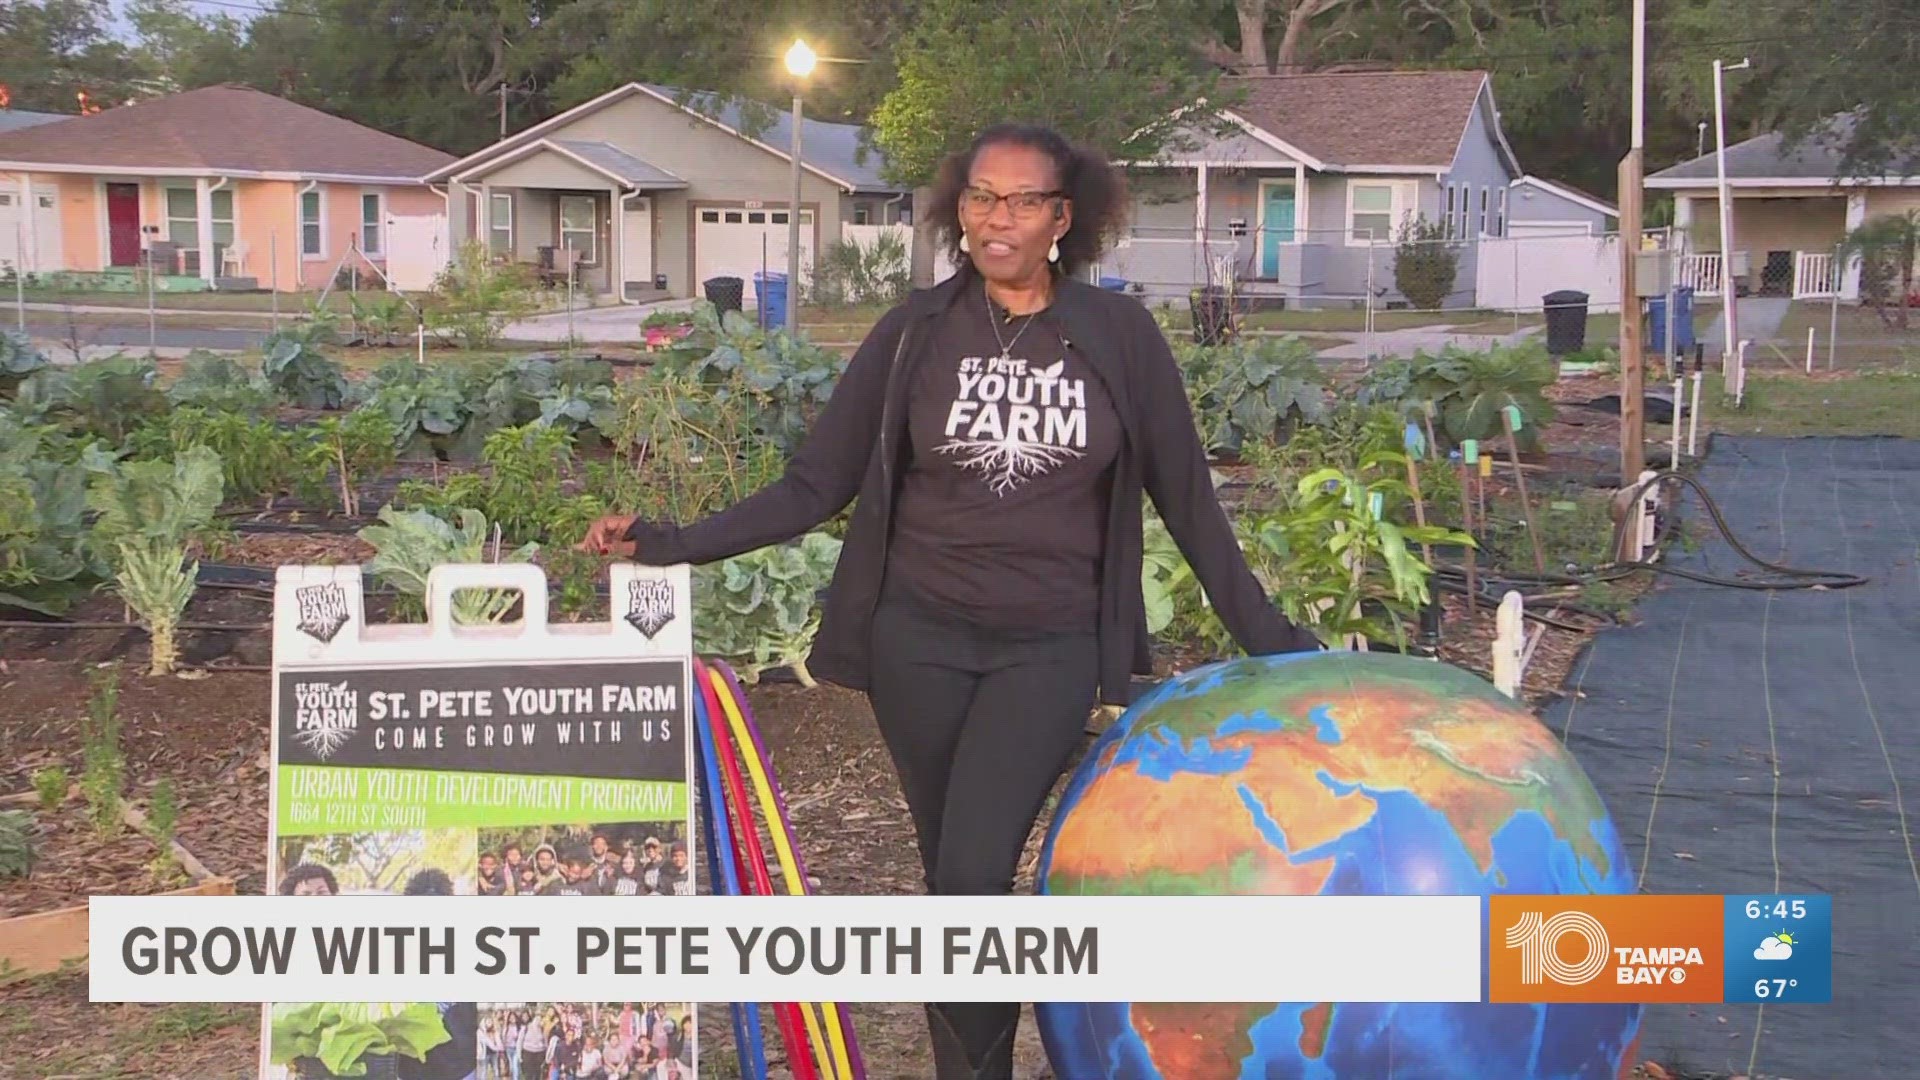 The mission of St. Pete Youth Farm is to provide healthy, nutritious foods to the community though a youth-led initiative.